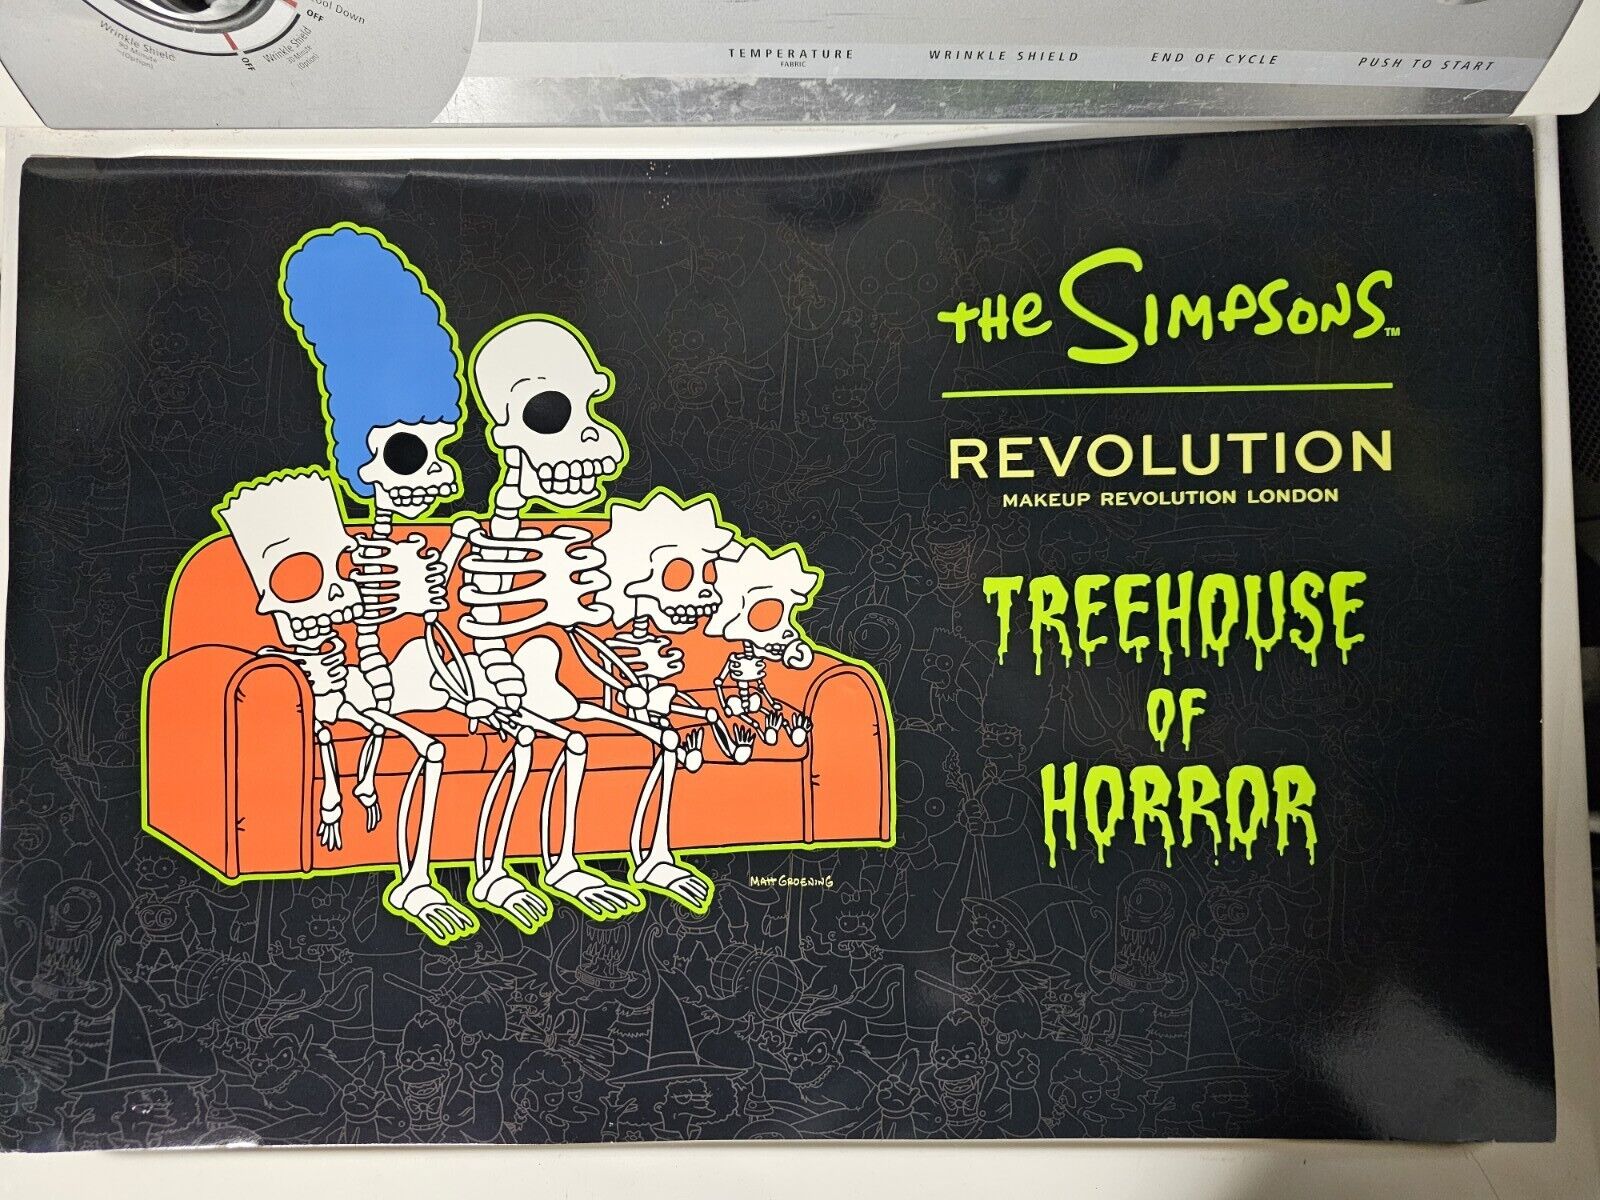 The Simpsons Makeup Revolution - Treehouse Of Horror Poster Rare Instore Promo